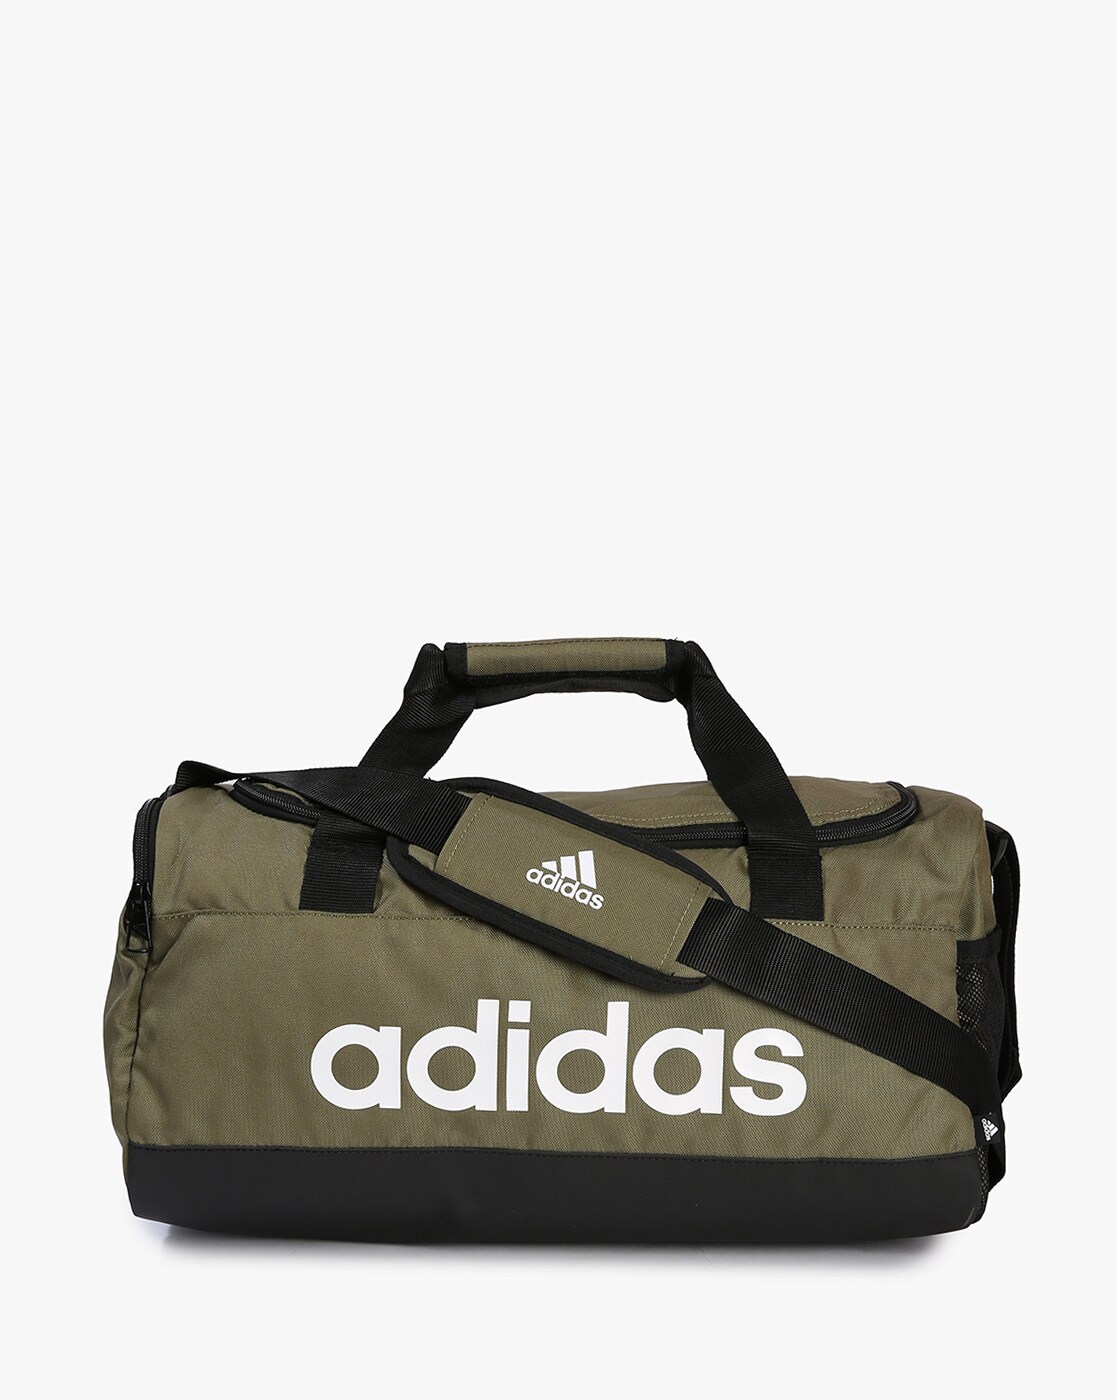 Share more than 81 green adidas bag super hot - in.cdgdbentre